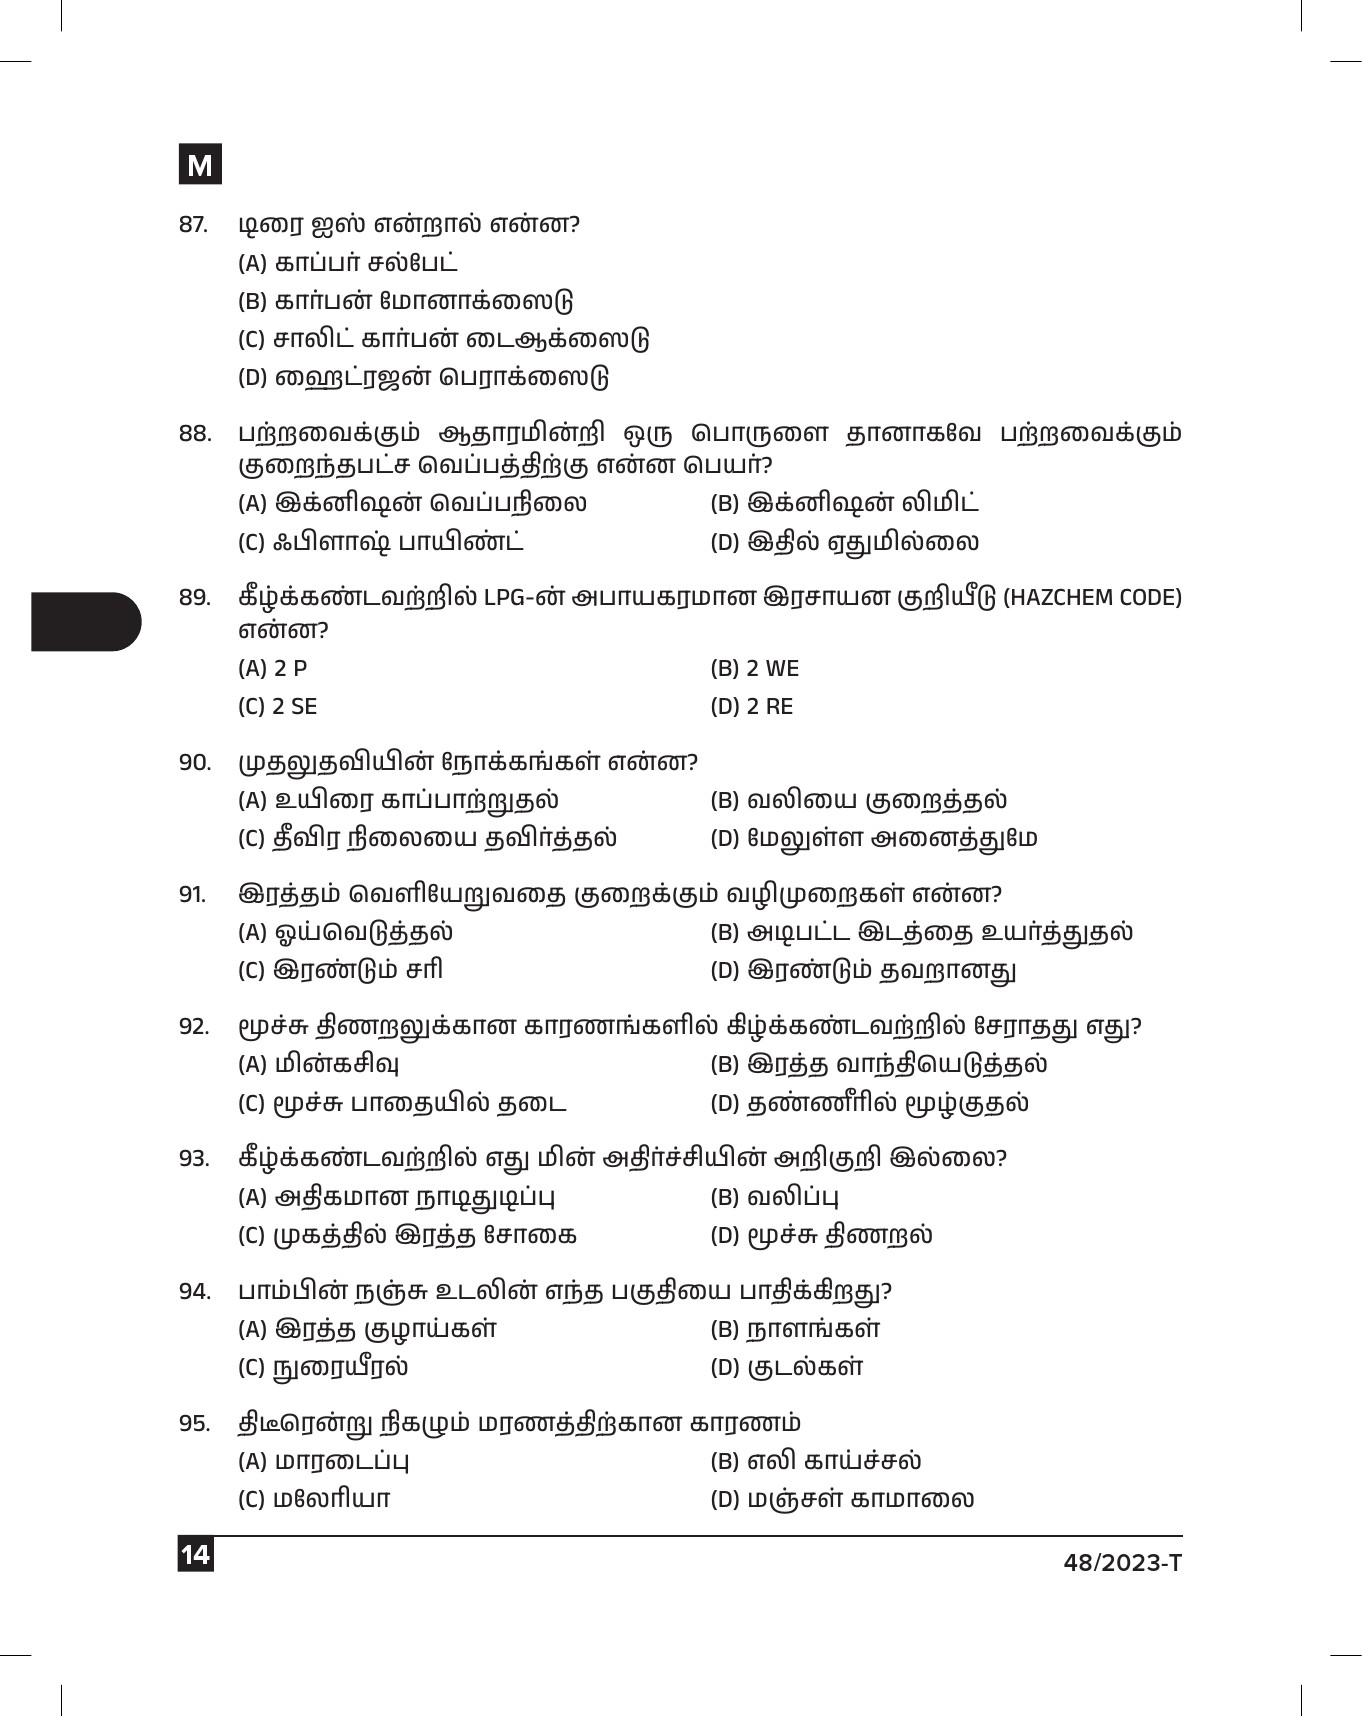 KPSC Fire and Rescue Officer Tamil Exam 2023 Code 0482023 T 13